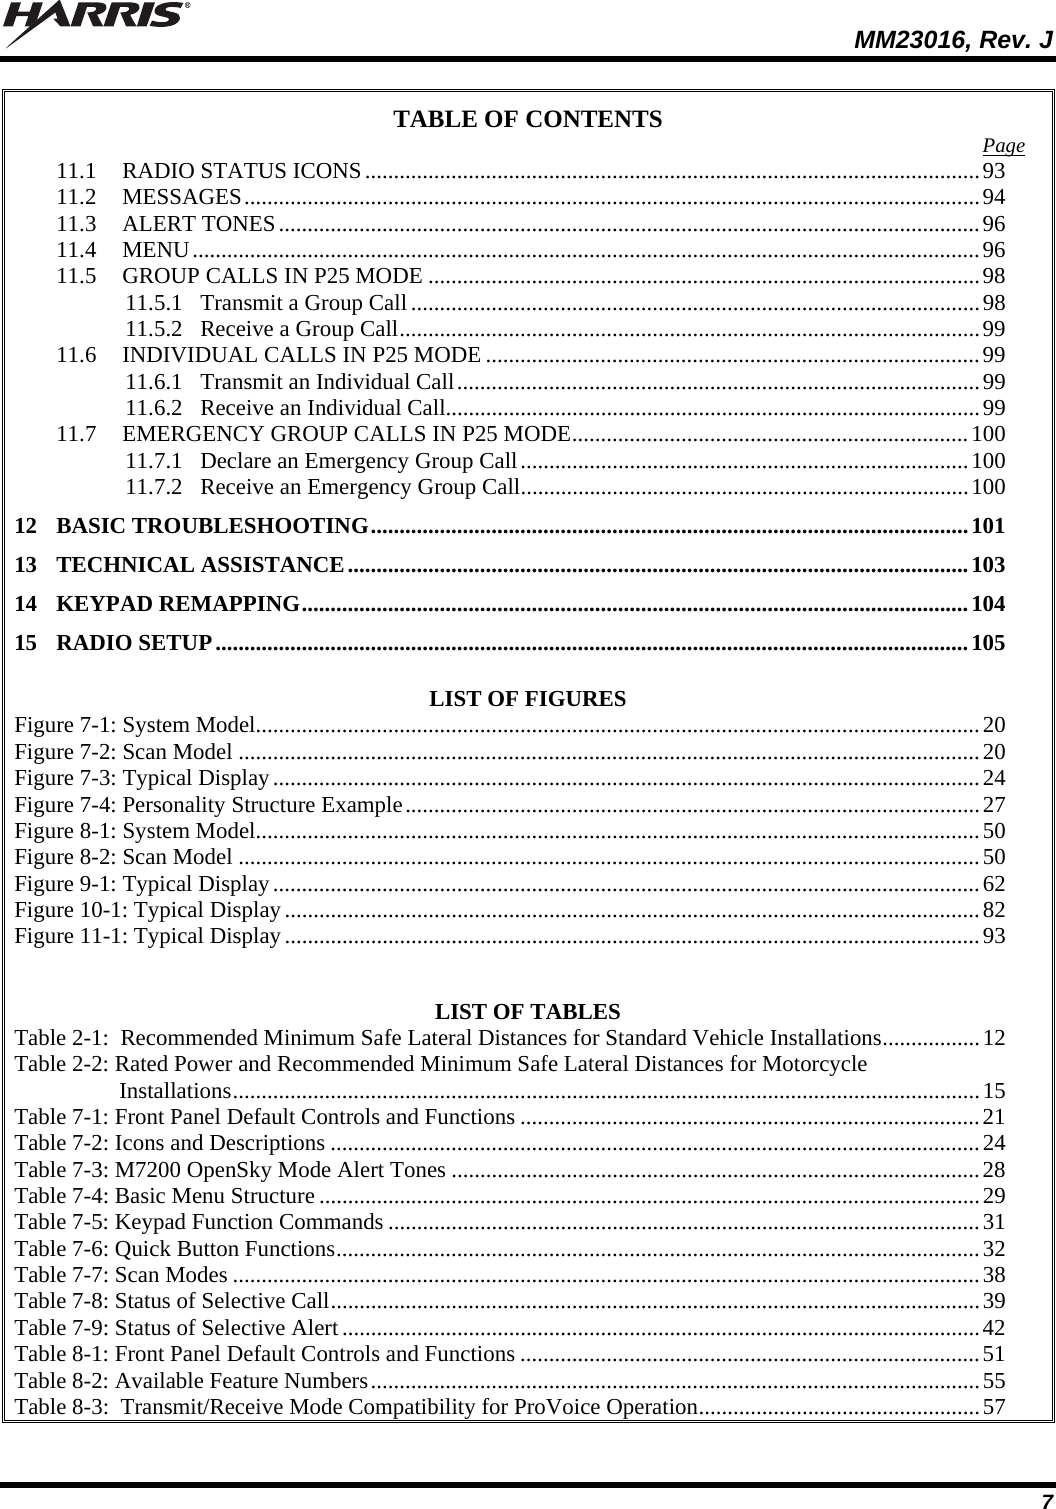  MM23016, Rev. J 7 TABLE OF CONTENTS  Page 11.1 RADIO STATUS ICONS...........................................................................................................93 11.2 MESSAGES................................................................................................................................94 11.3 ALERT TONES..........................................................................................................................96 11.4 MENU.........................................................................................................................................96 11.5 GROUP CALLS IN P25 MODE ................................................................................................98 11.5.1 Transmit a Group Call...................................................................................................98 11.5.2 Receive a Group Call.....................................................................................................99 11.6 INDIVIDUAL CALLS IN P25 MODE ......................................................................................99 11.6.1 Transmit an Individual Call...........................................................................................99 11.6.2 Receive an Individual Call.............................................................................................99 11.7 EMERGENCY GROUP CALLS IN P25 MODE.....................................................................100 11.7.1 Declare an Emergency Group Call..............................................................................100 11.7.2 Receive an Emergency Group Call..............................................................................100 12 BASIC TROUBLESHOOTING........................................................................................................101 13 TECHNICAL ASSISTANCE............................................................................................................103 14 KEYPAD REMAPPING....................................................................................................................104 15 RADIO SETUP...................................................................................................................................105  LIST OF FIGURES Figure 7-1: System Model..............................................................................................................................20 Figure 7-2: Scan Model .................................................................................................................................20 Figure 7-3: Typical Display...........................................................................................................................24 Figure 7-4: Personality Structure Example....................................................................................................27 Figure 8-1: System Model..............................................................................................................................50 Figure 8-2: Scan Model .................................................................................................................................50 Figure 9-1: Typical Display...........................................................................................................................62 Figure 10-1: Typical Display.........................................................................................................................82 Figure 11-1: Typical Display.........................................................................................................................93   LIST OF TABLES Table 2-1:  Recommended Minimum Safe Lateral Distances for Standard Vehicle Installations.................12 Table 2-2: Rated Power and Recommended Minimum Safe Lateral Distances for Motorcycle Installations..................................................................................................................................15 Table 7-1: Front Panel Default Controls and Functions ................................................................................21 Table 7-2: Icons and Descriptions .................................................................................................................24 Table 7-3: M7200 OpenSky Mode Alert Tones ............................................................................................28 Table 7-4: Basic Menu Structure ...................................................................................................................29 Table 7-5: Keypad Function Commands .......................................................................................................31 Table 7-6: Quick Button Functions................................................................................................................32 Table 7-7: Scan Modes ..................................................................................................................................38 Table 7-8: Status of Selective Call.................................................................................................................39 Table 7-9: Status of Selective Alert...............................................................................................................42 Table 8-1: Front Panel Default Controls and Functions ................................................................................51 Table 8-2: Available Feature Numbers..........................................................................................................55 Table 8-3:  Transmit/Receive Mode Compatibility for ProVoice Operation.................................................57 